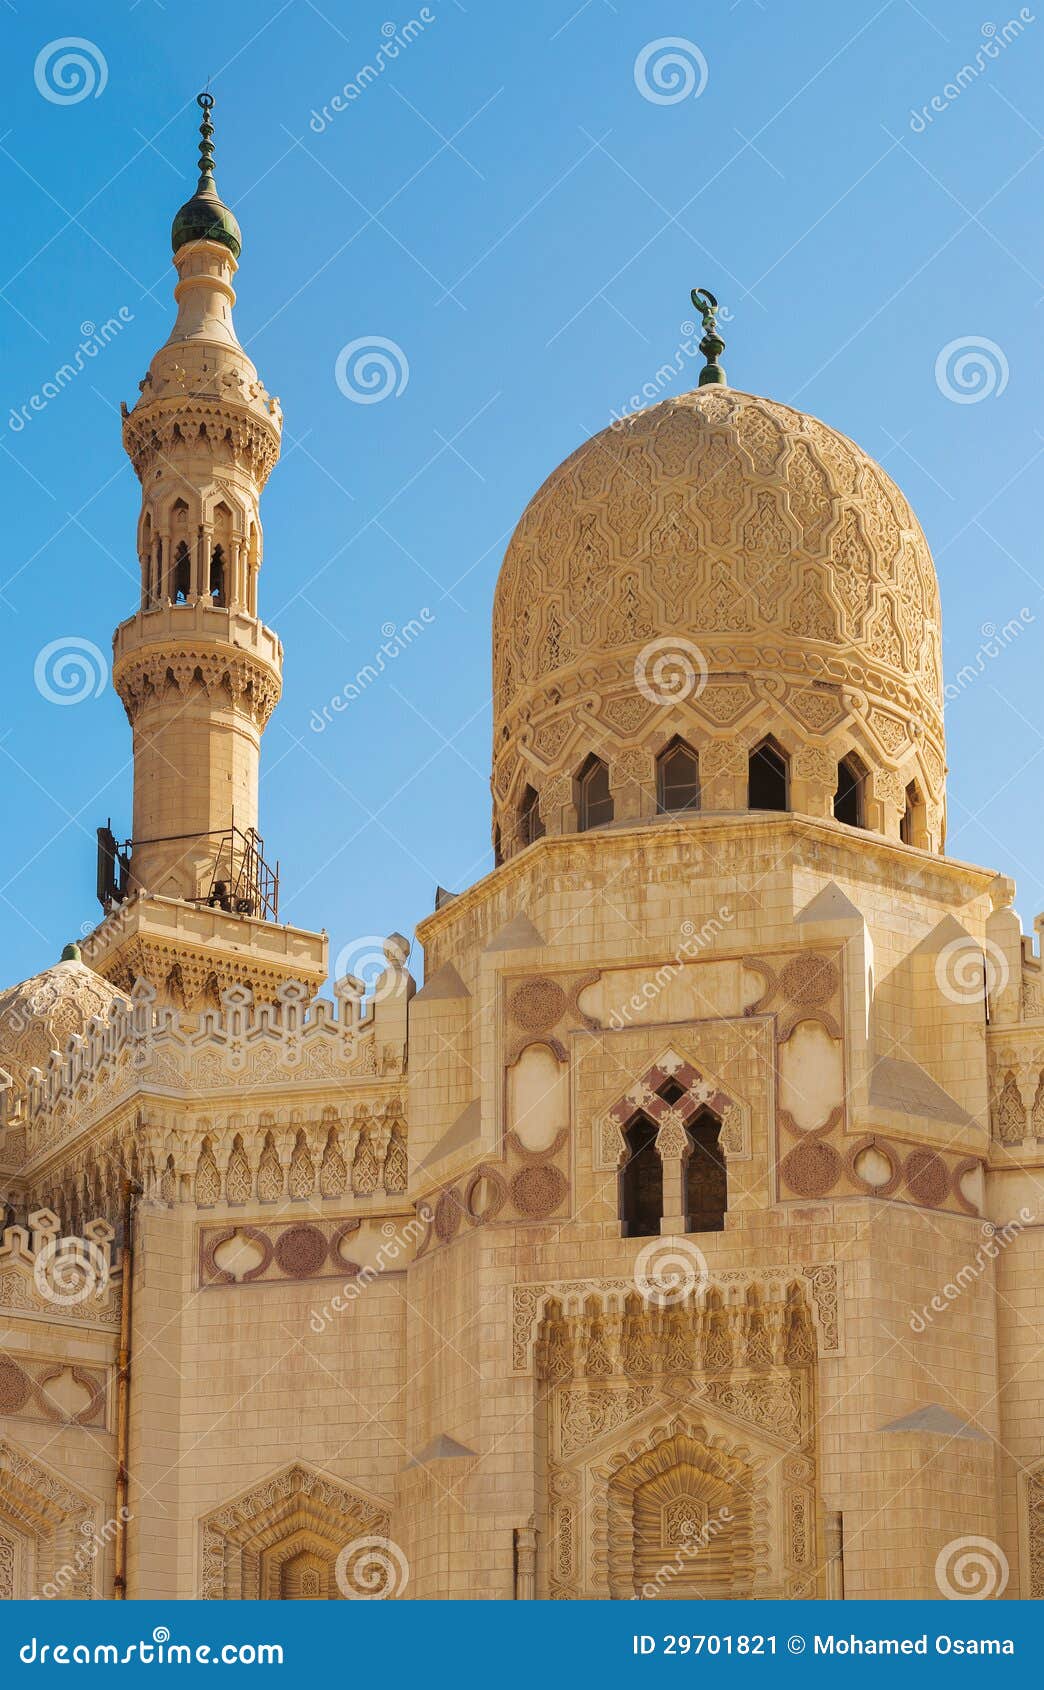 mosque dome and minaret